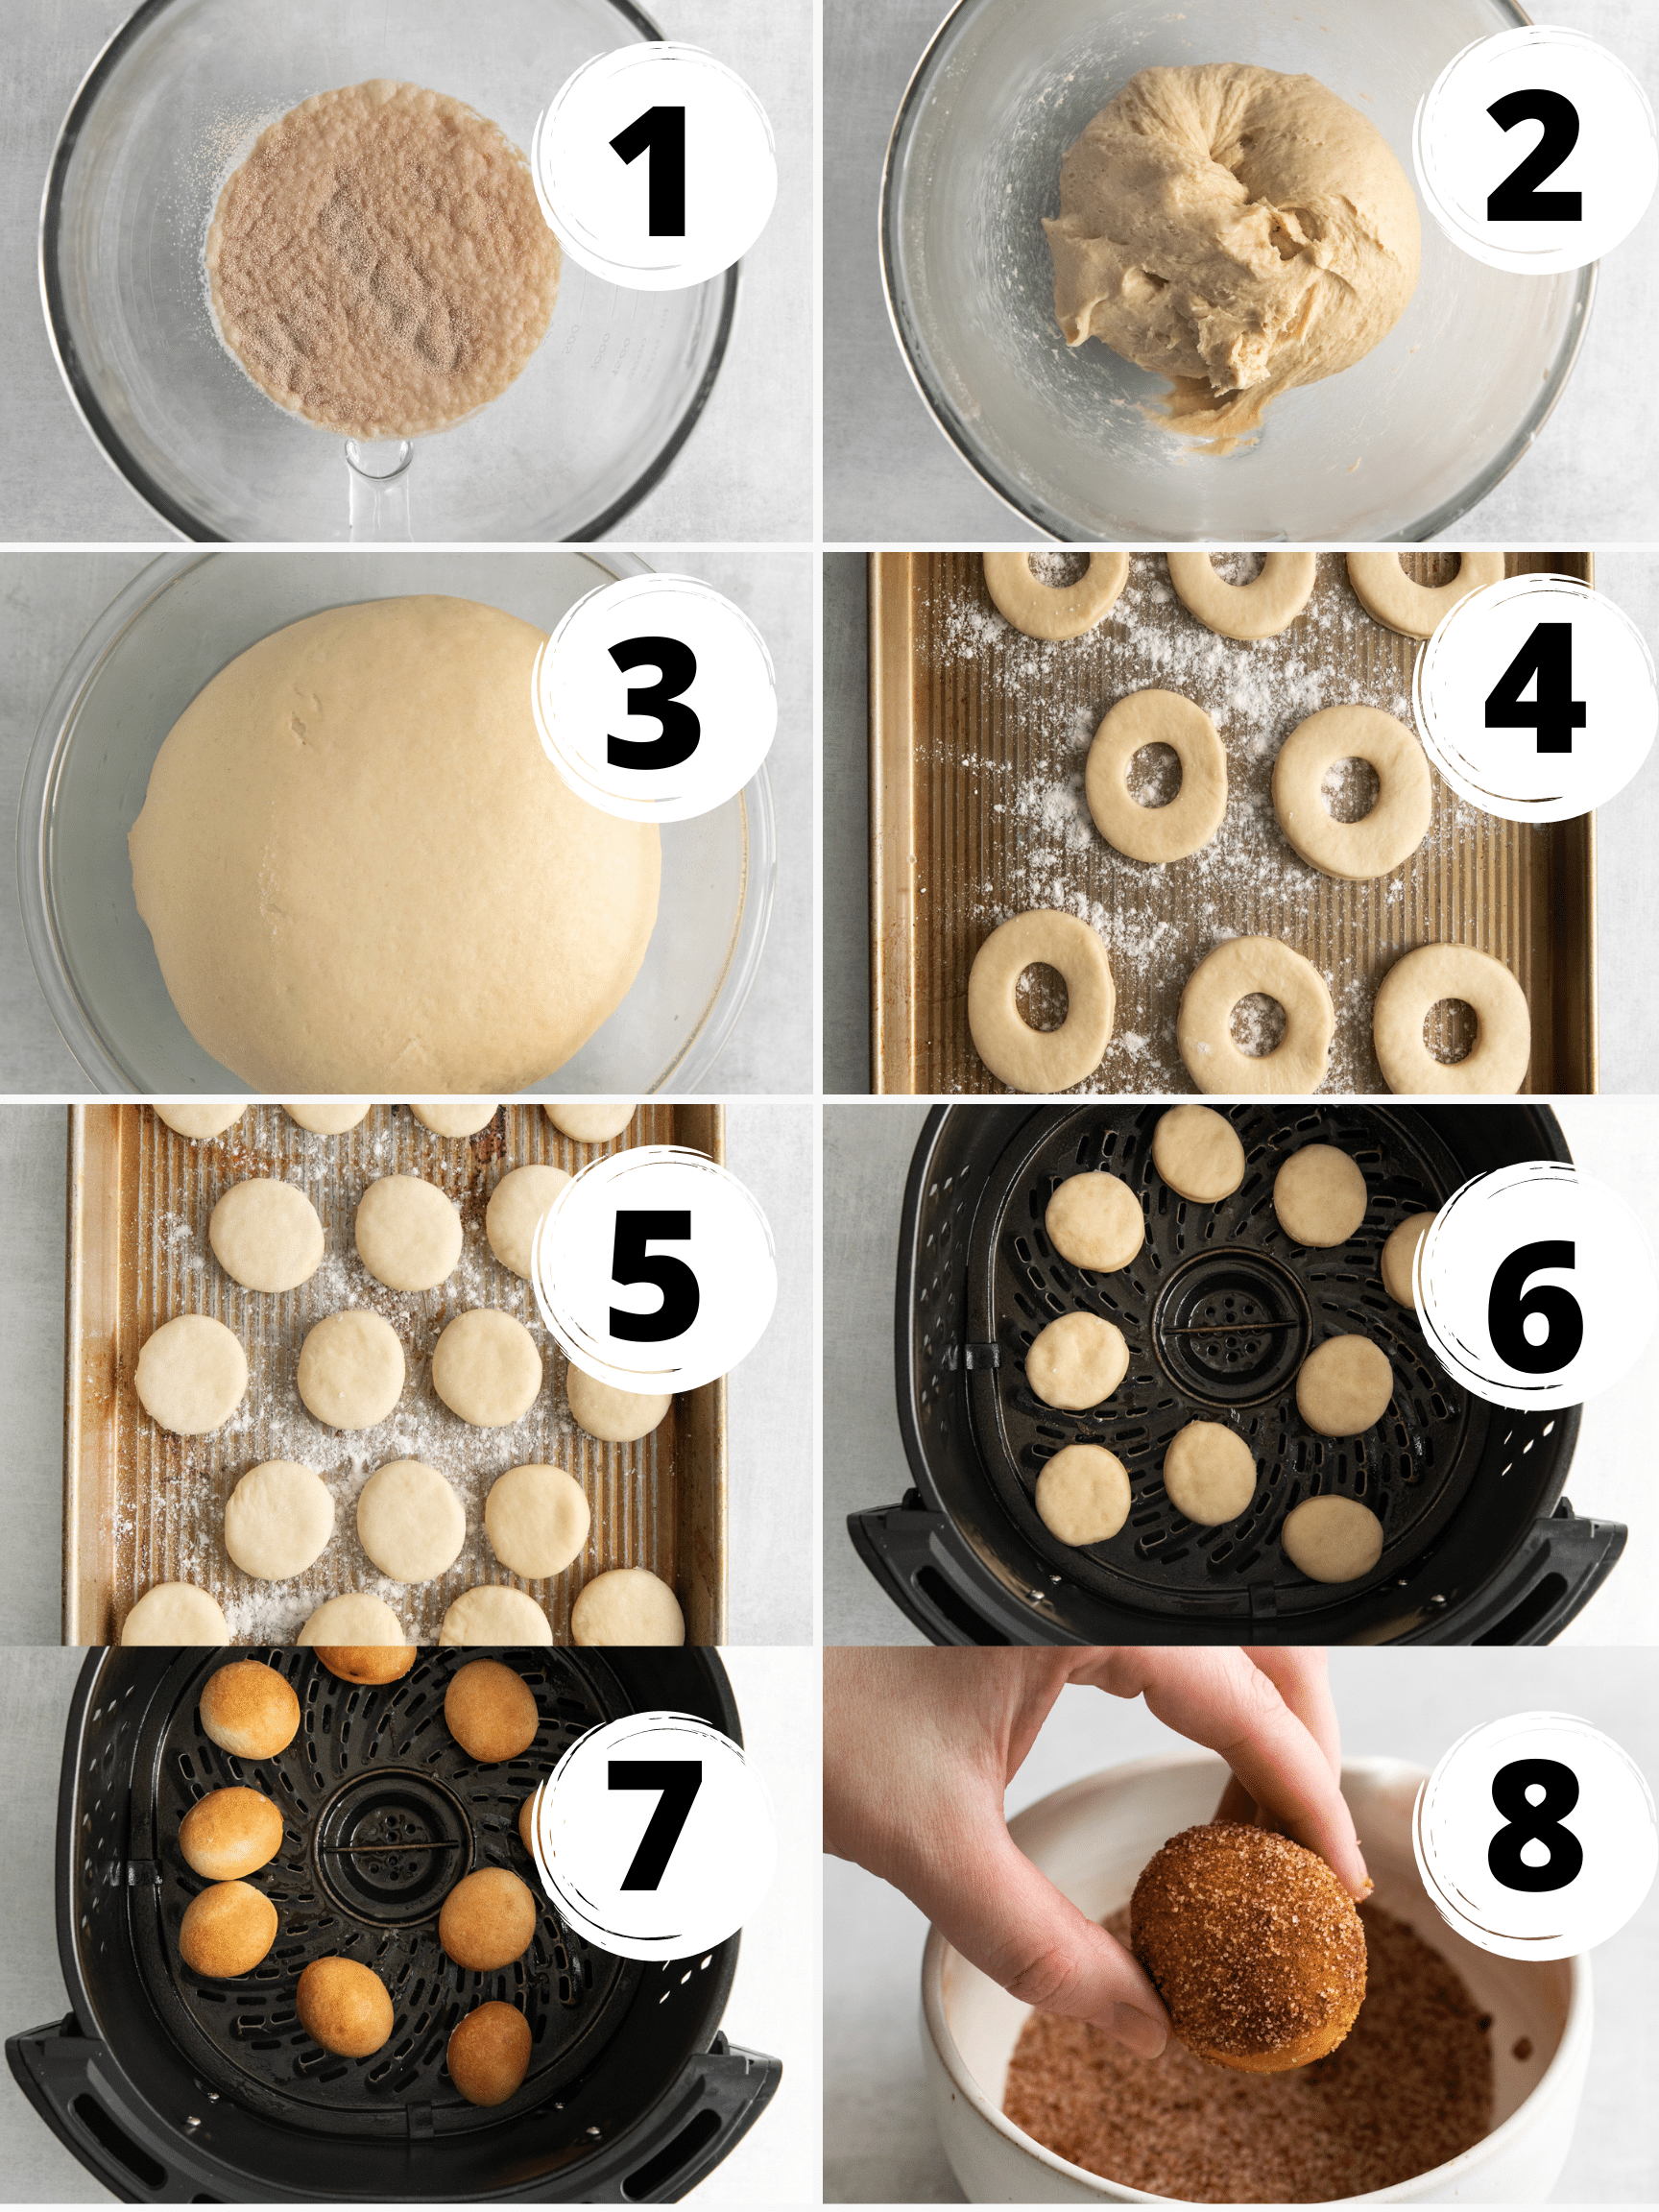 Collage of photos showing the steps to make Air Fryer Donut Holes.